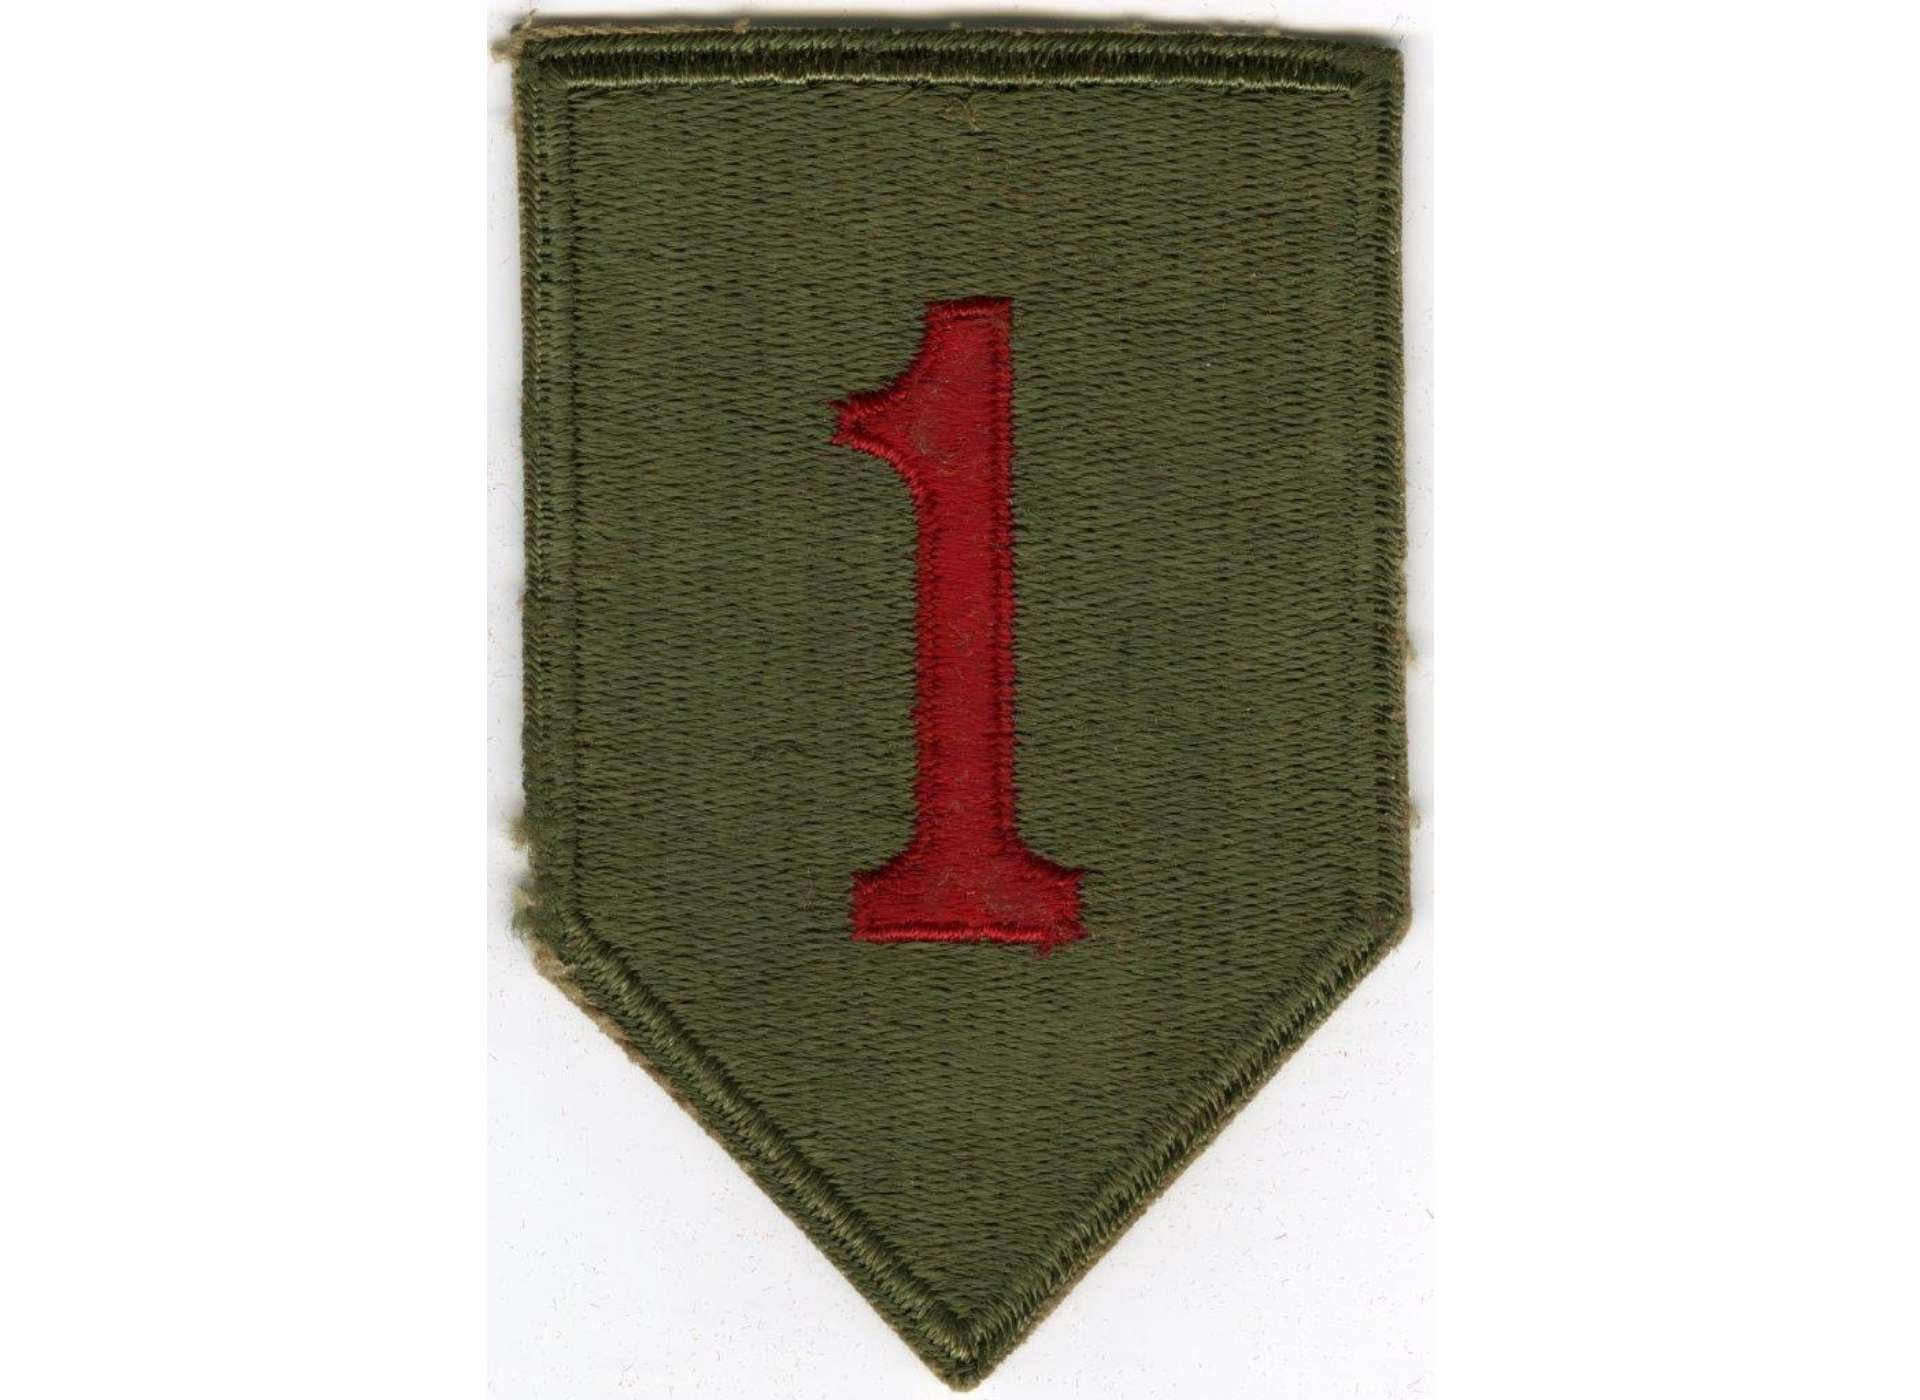 Big red one patch